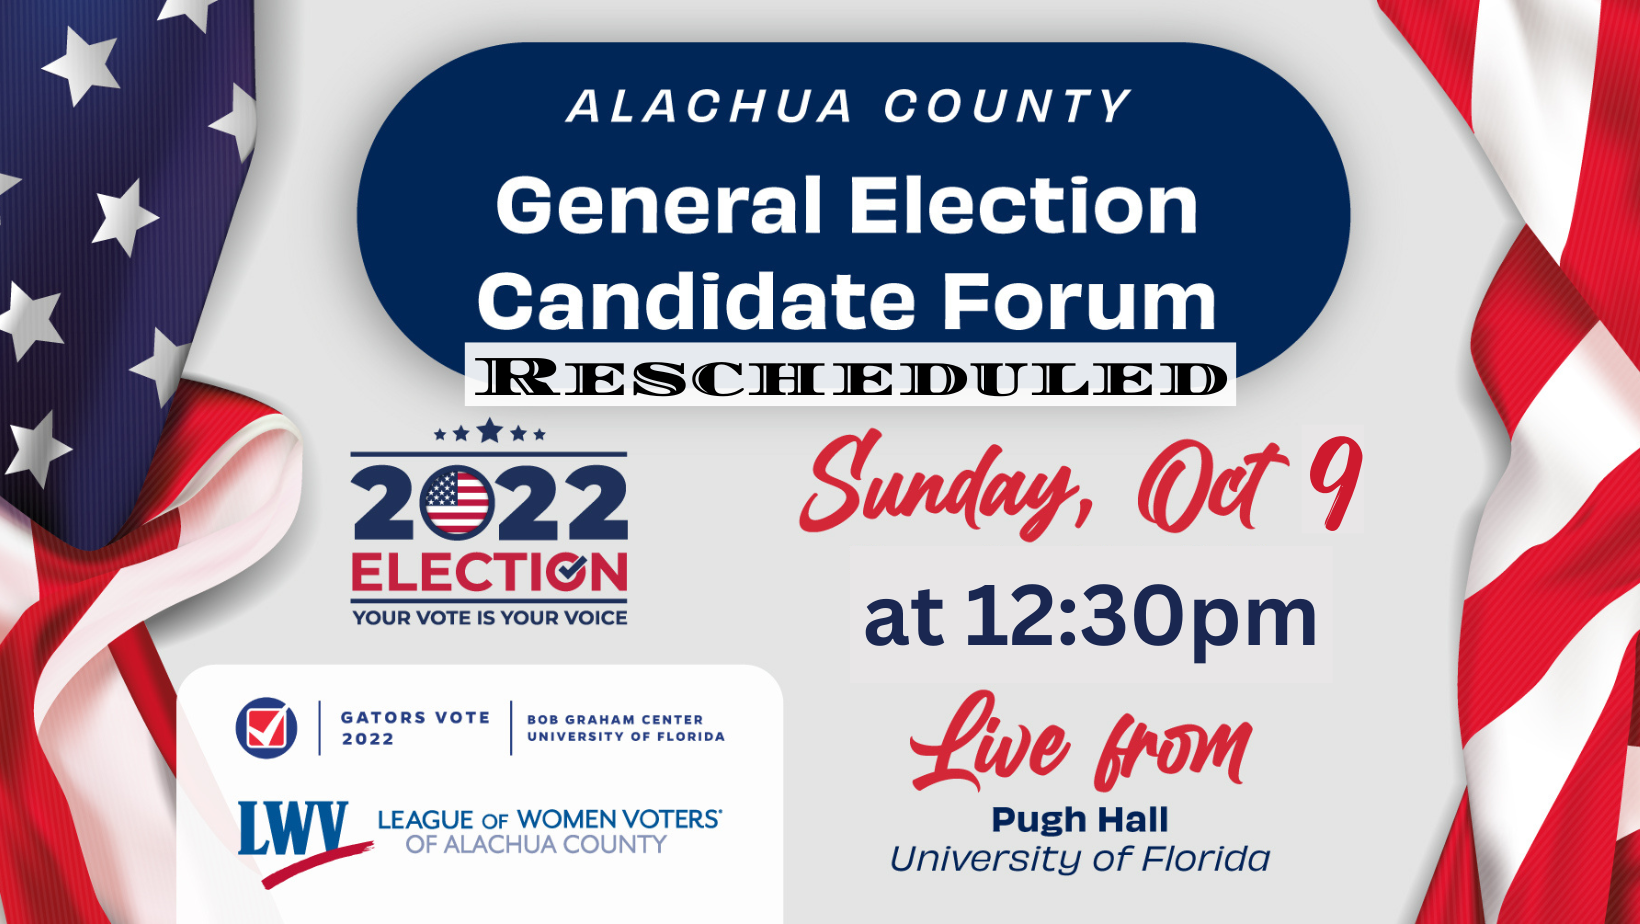 General Election Candidate Forum Rescheduled Sunday October 9